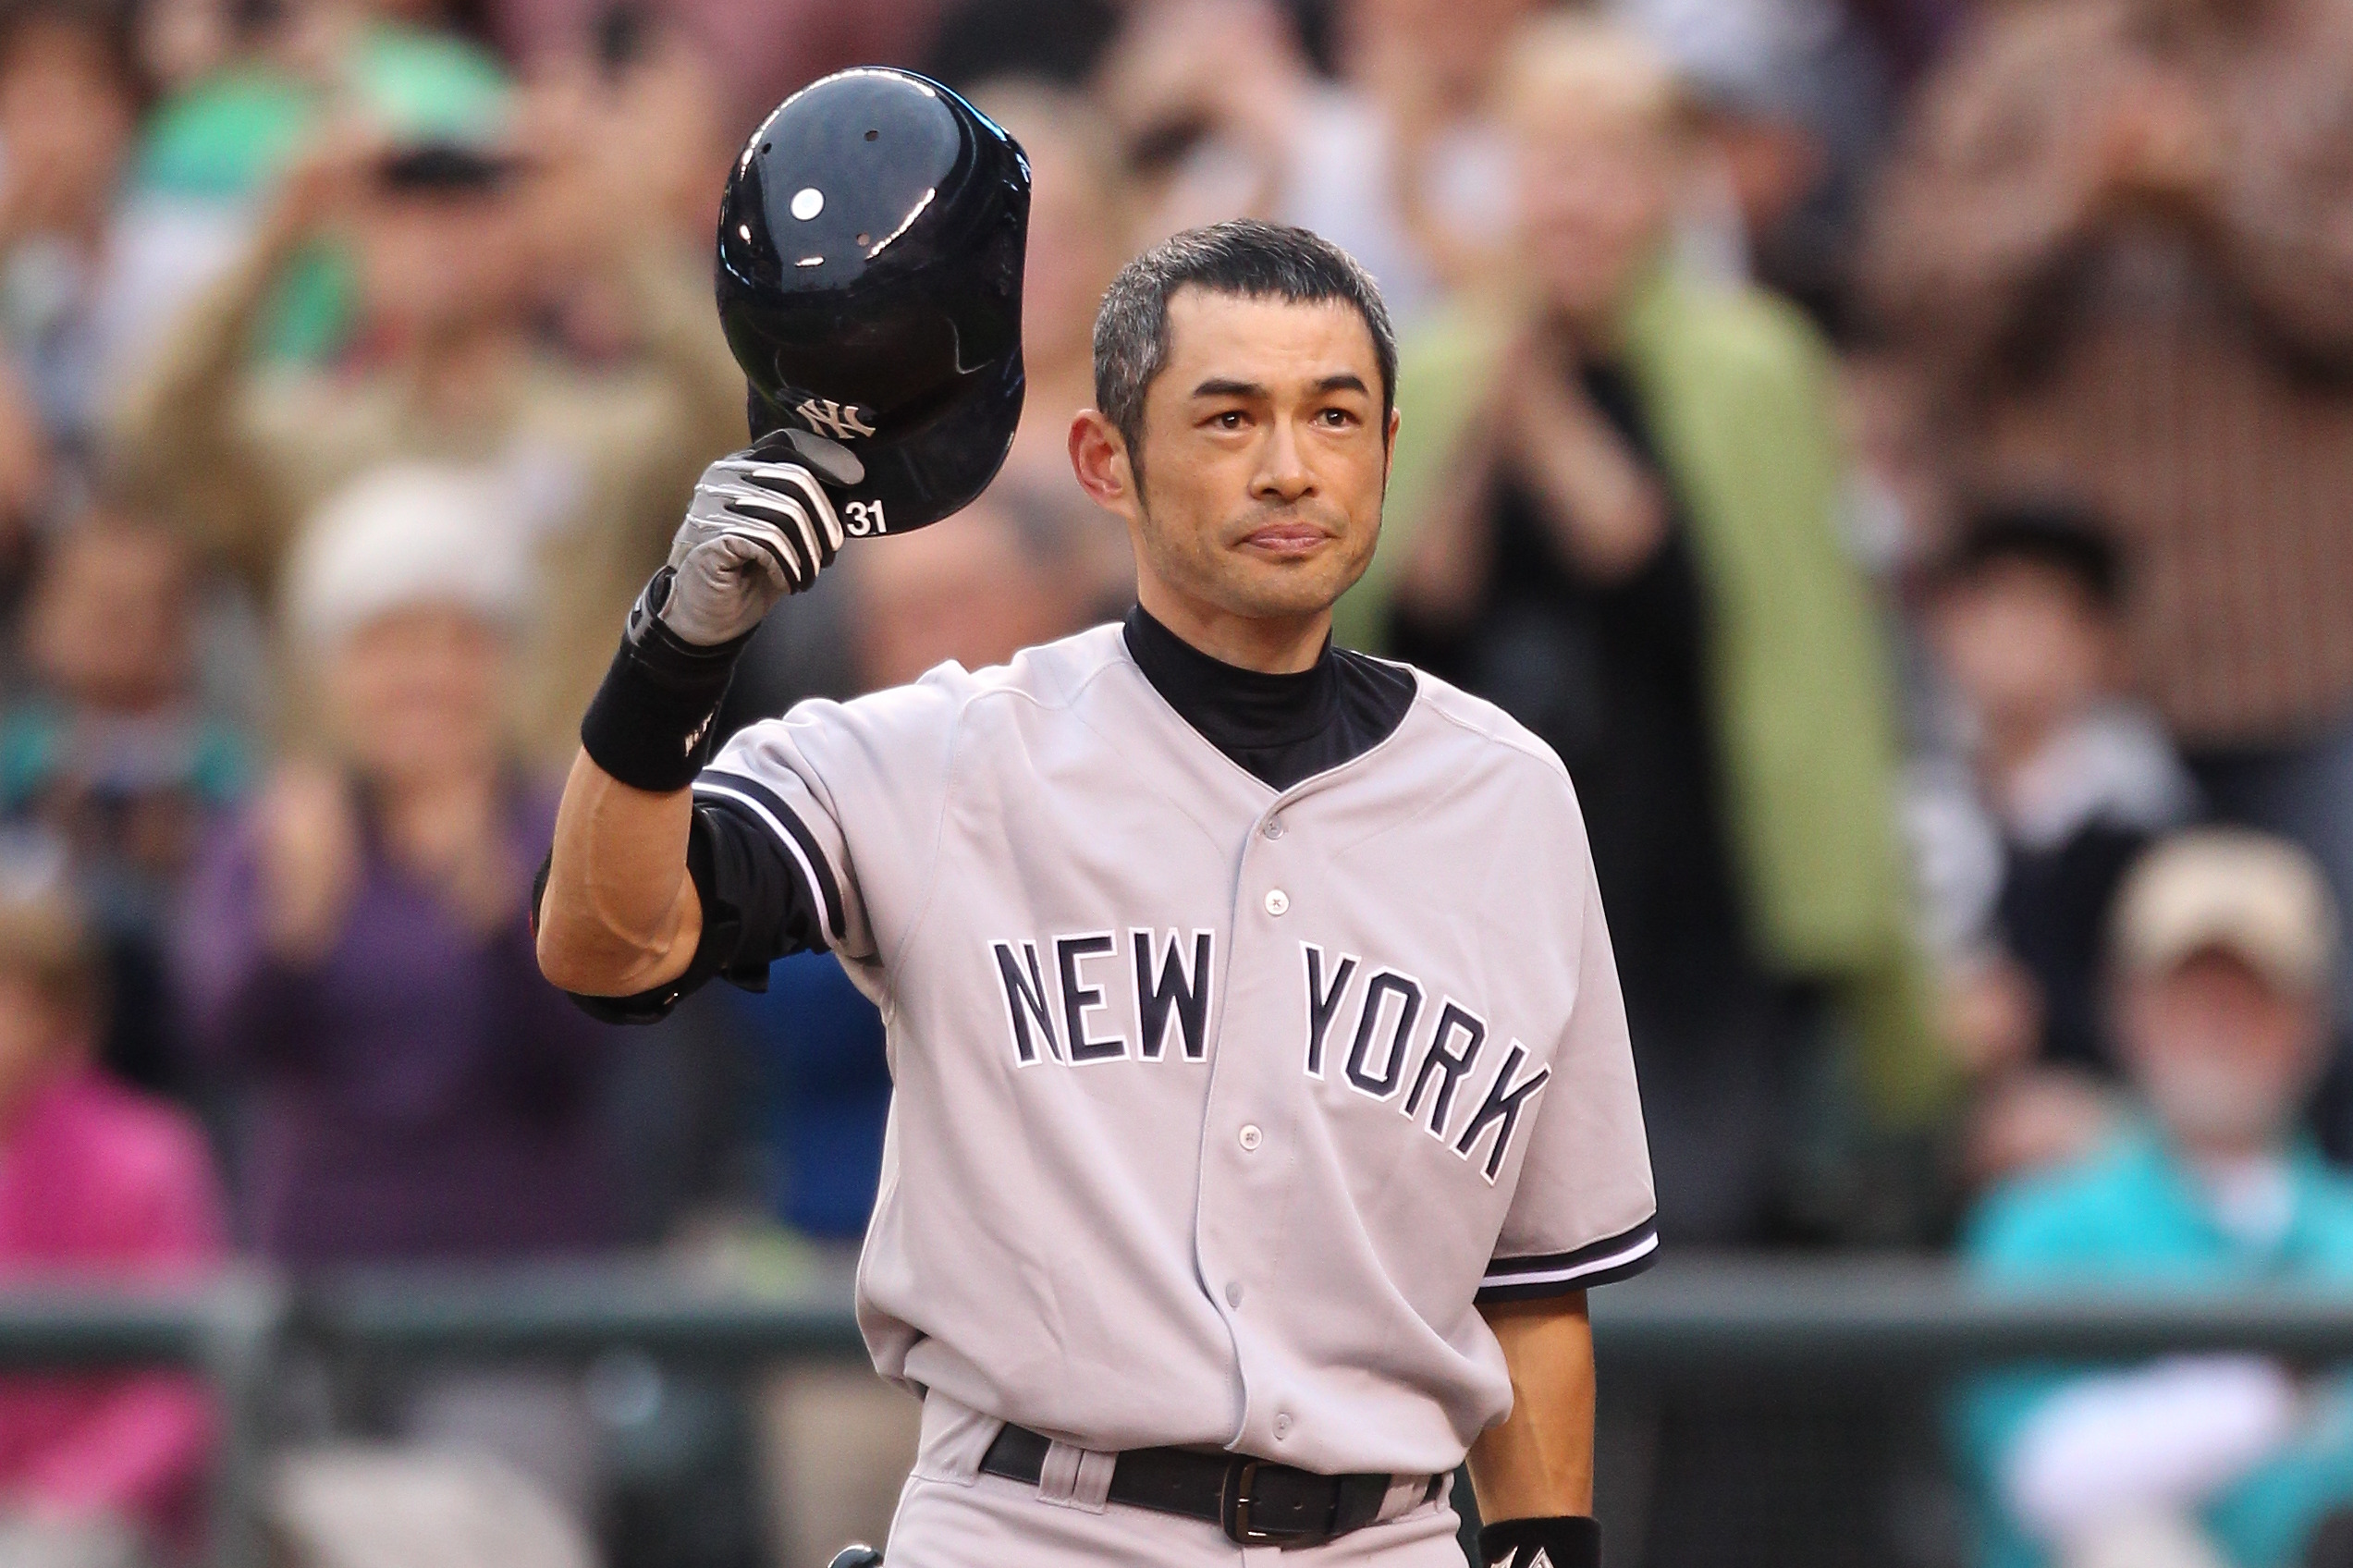 Now Pitching for the Marlins: Ichiro Suzuki - The New York Times